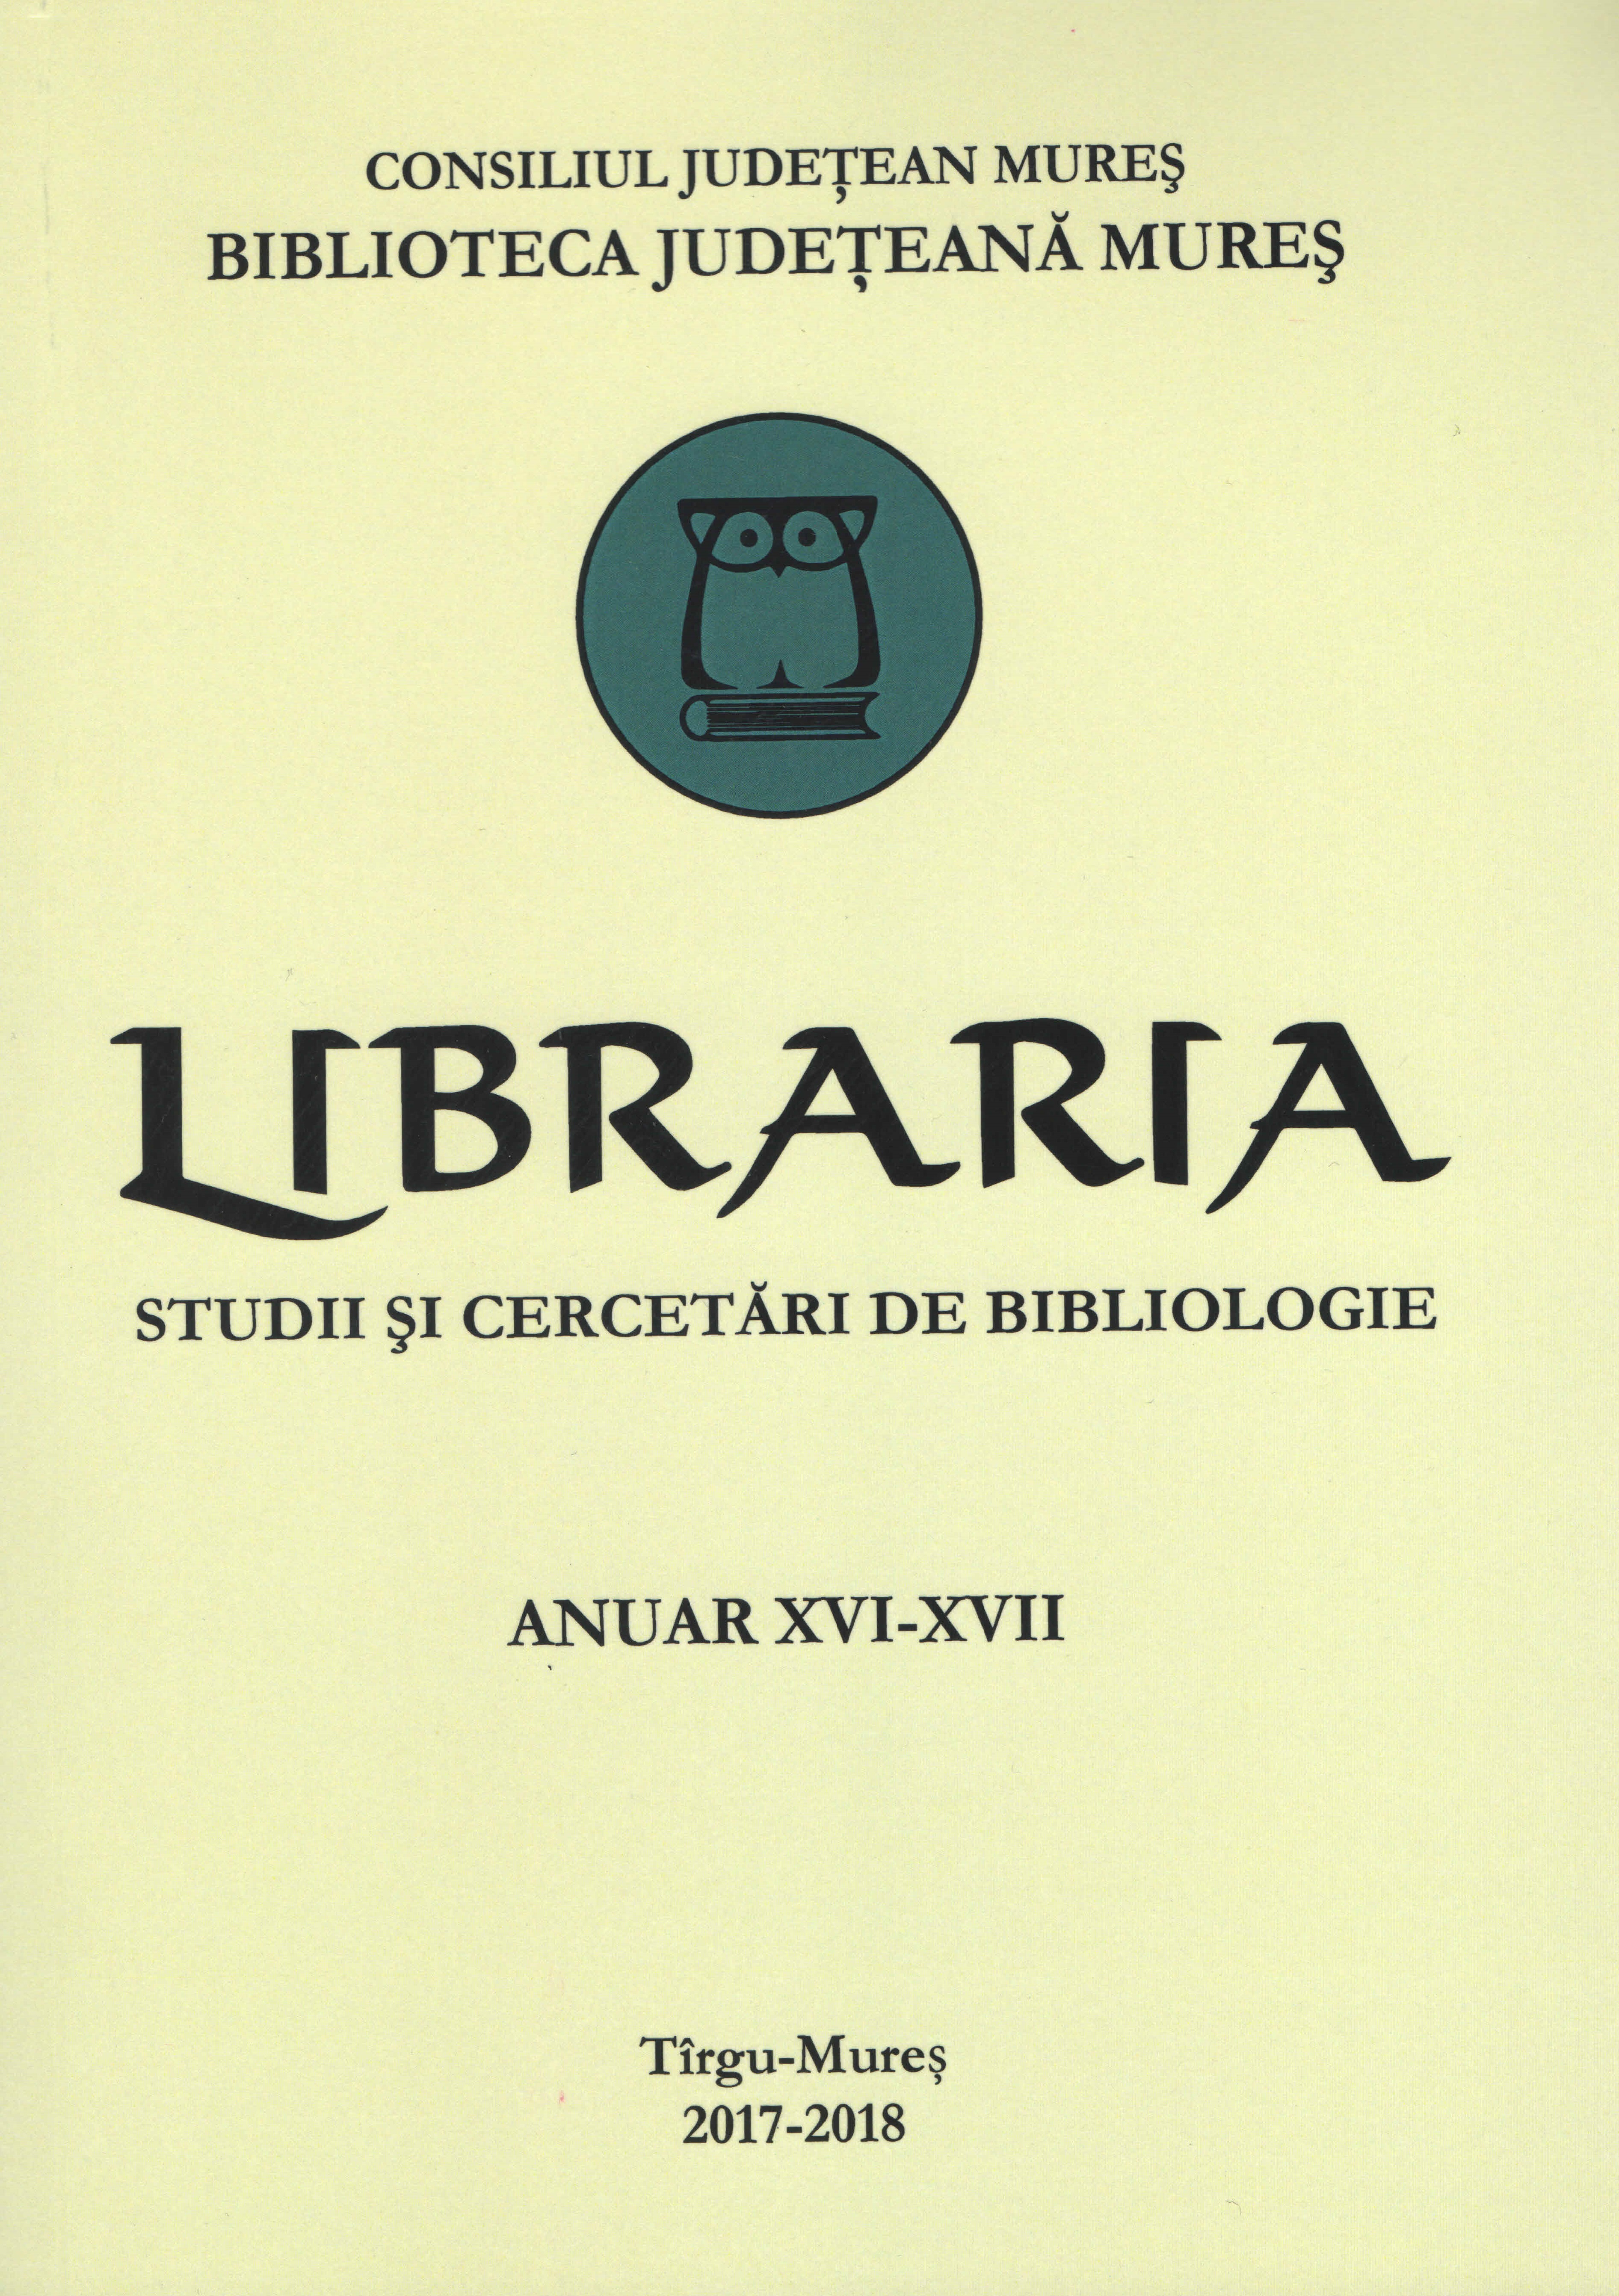 Iustin Handrea's personality, highlighted in book pages Cover Image